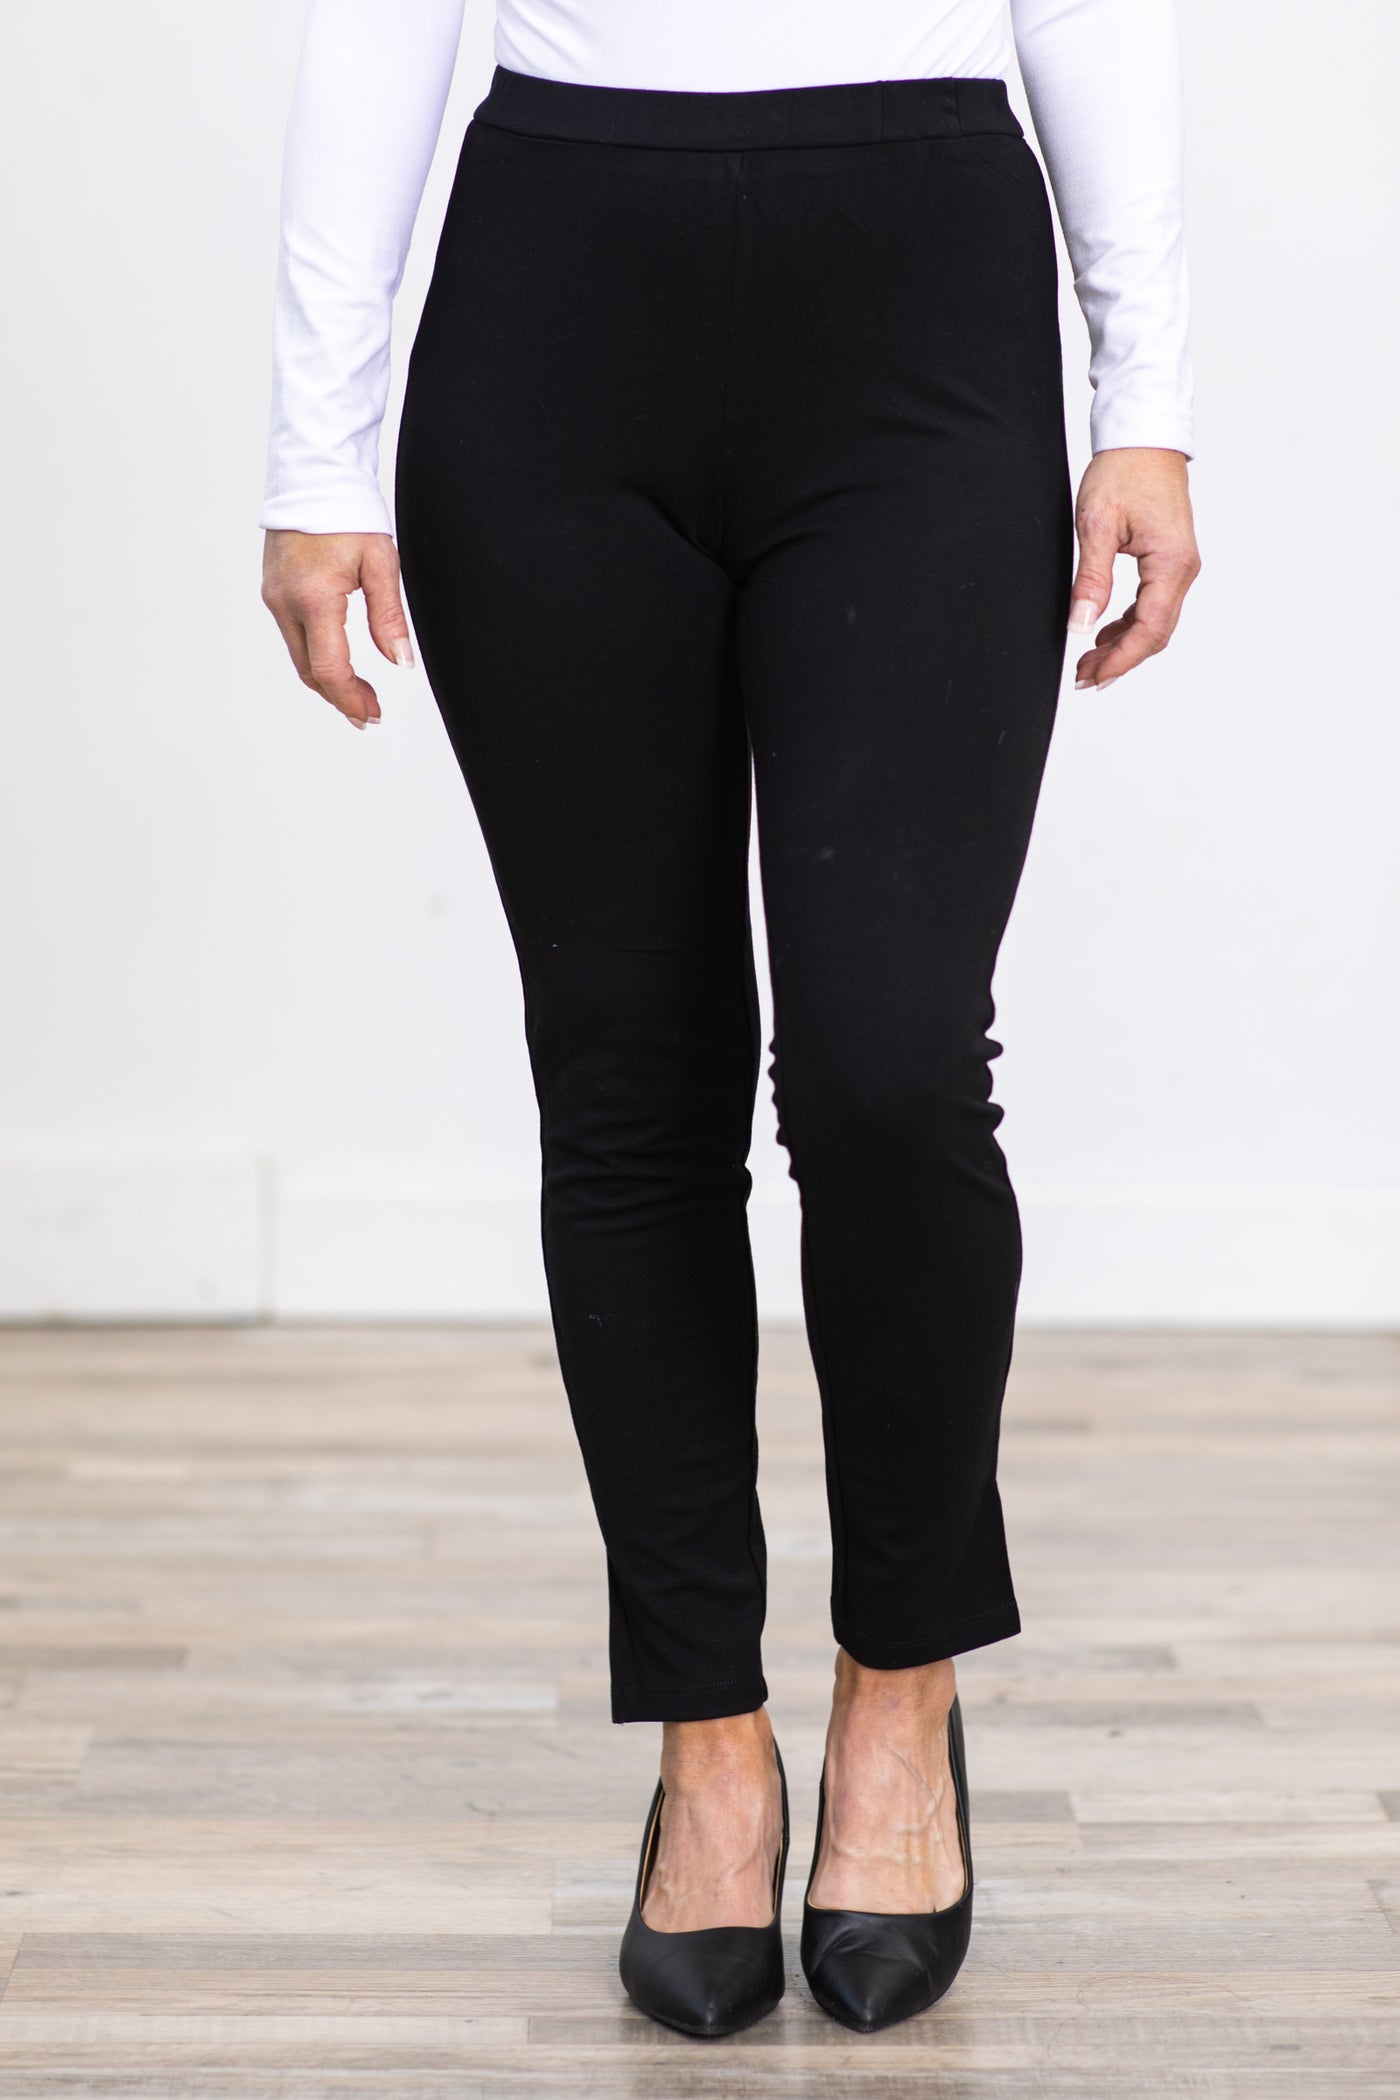 Black Leggings With Side Pocket · Filly Flair